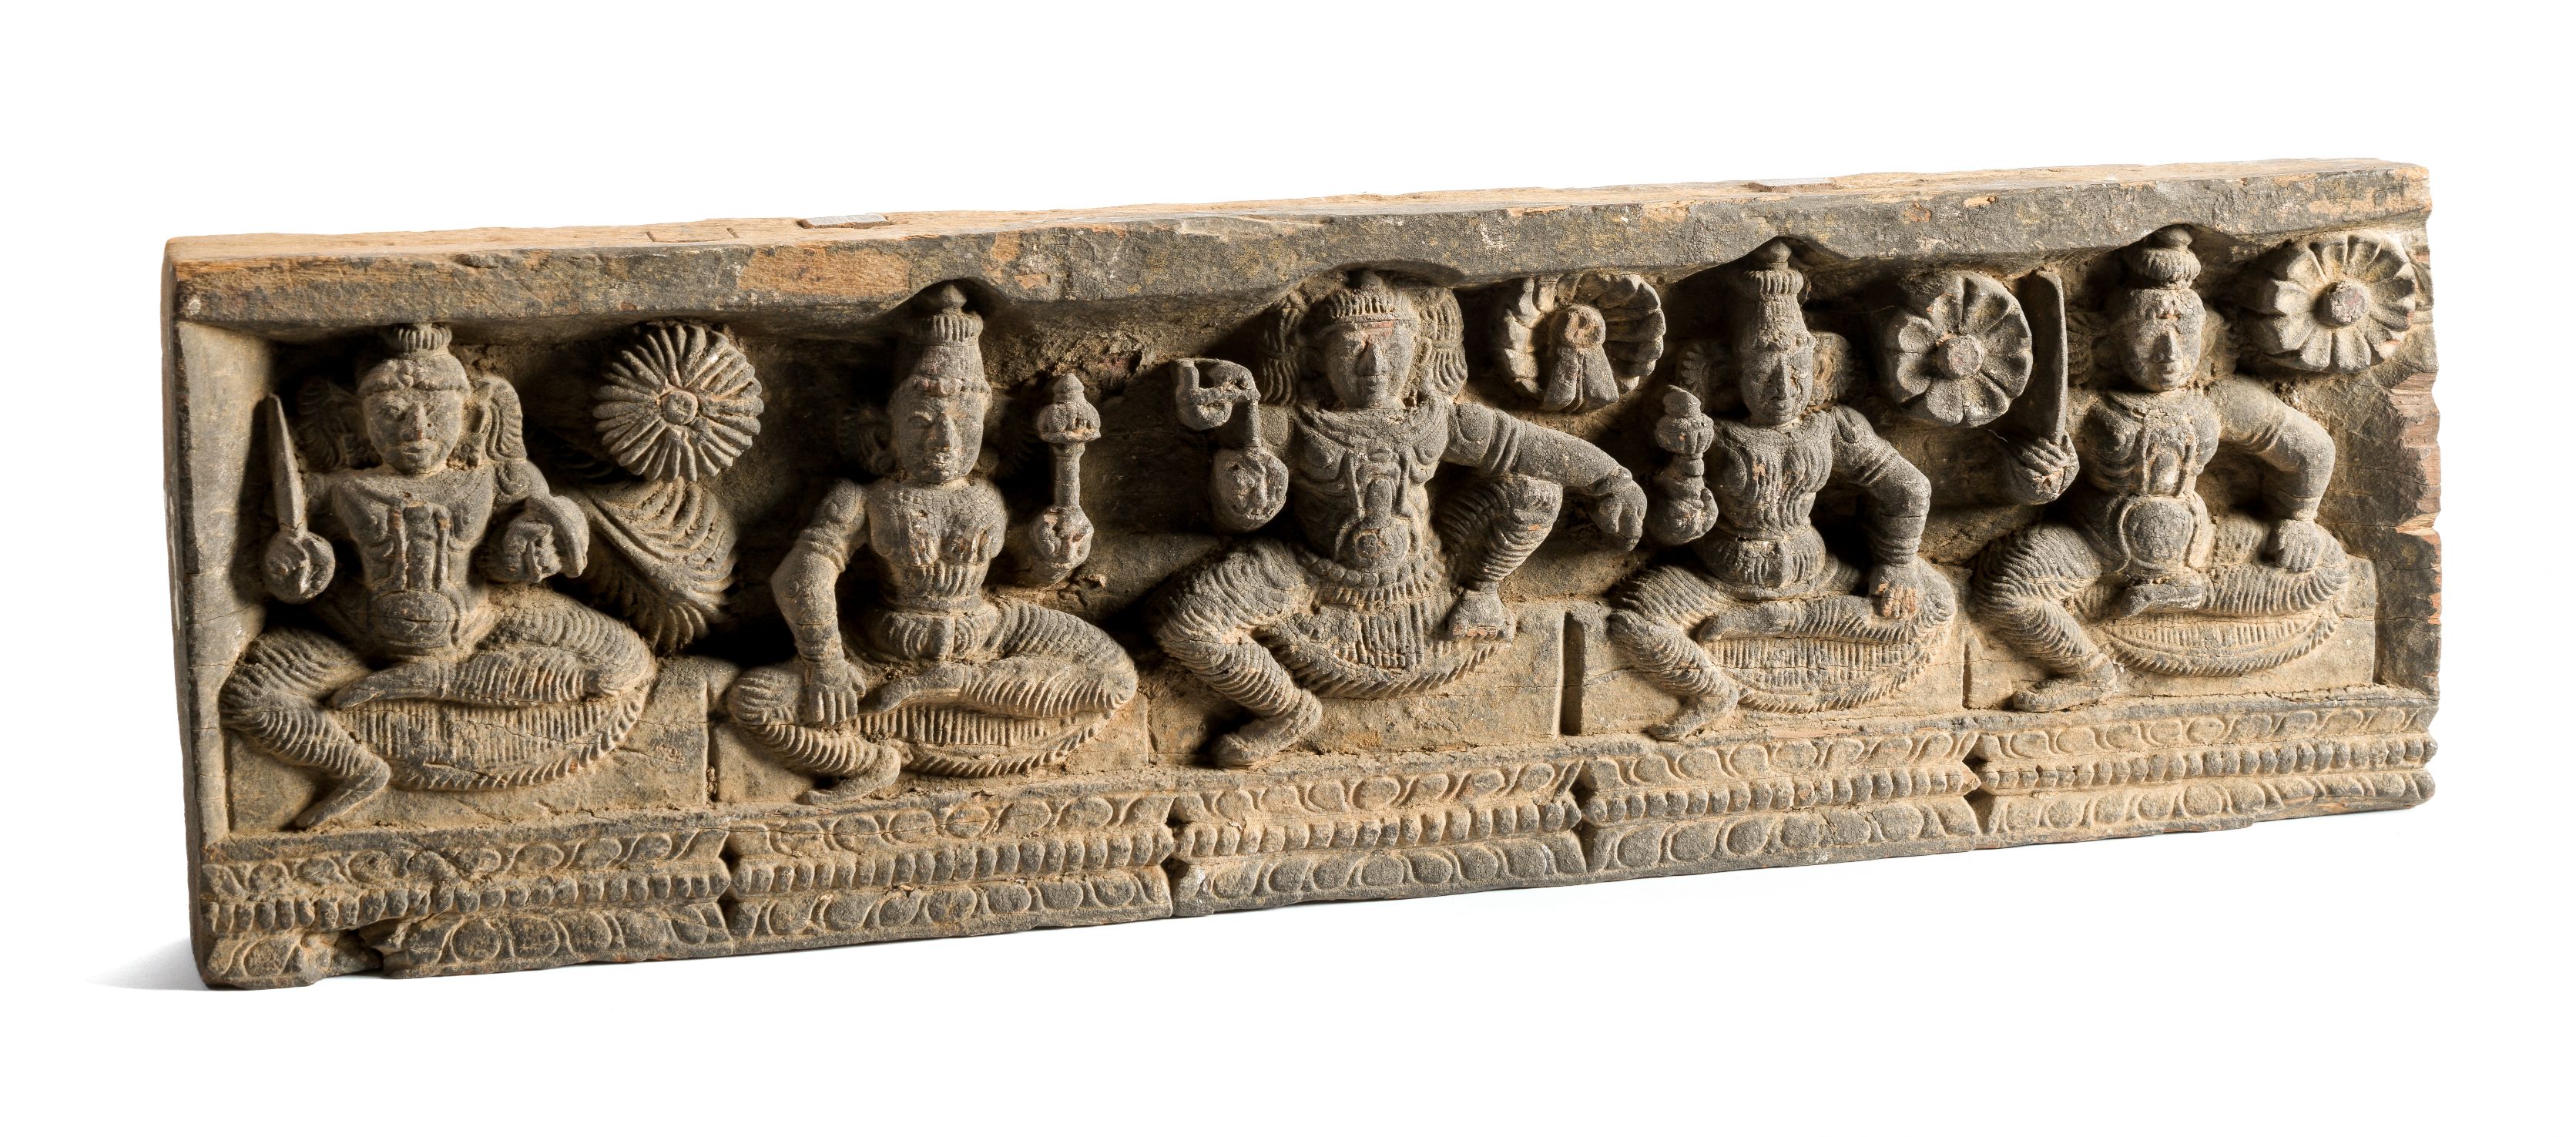 A CARVED WOOD FRIEZE PANEL, SOUTH INDIA, 18TH / 19TH CENTURY